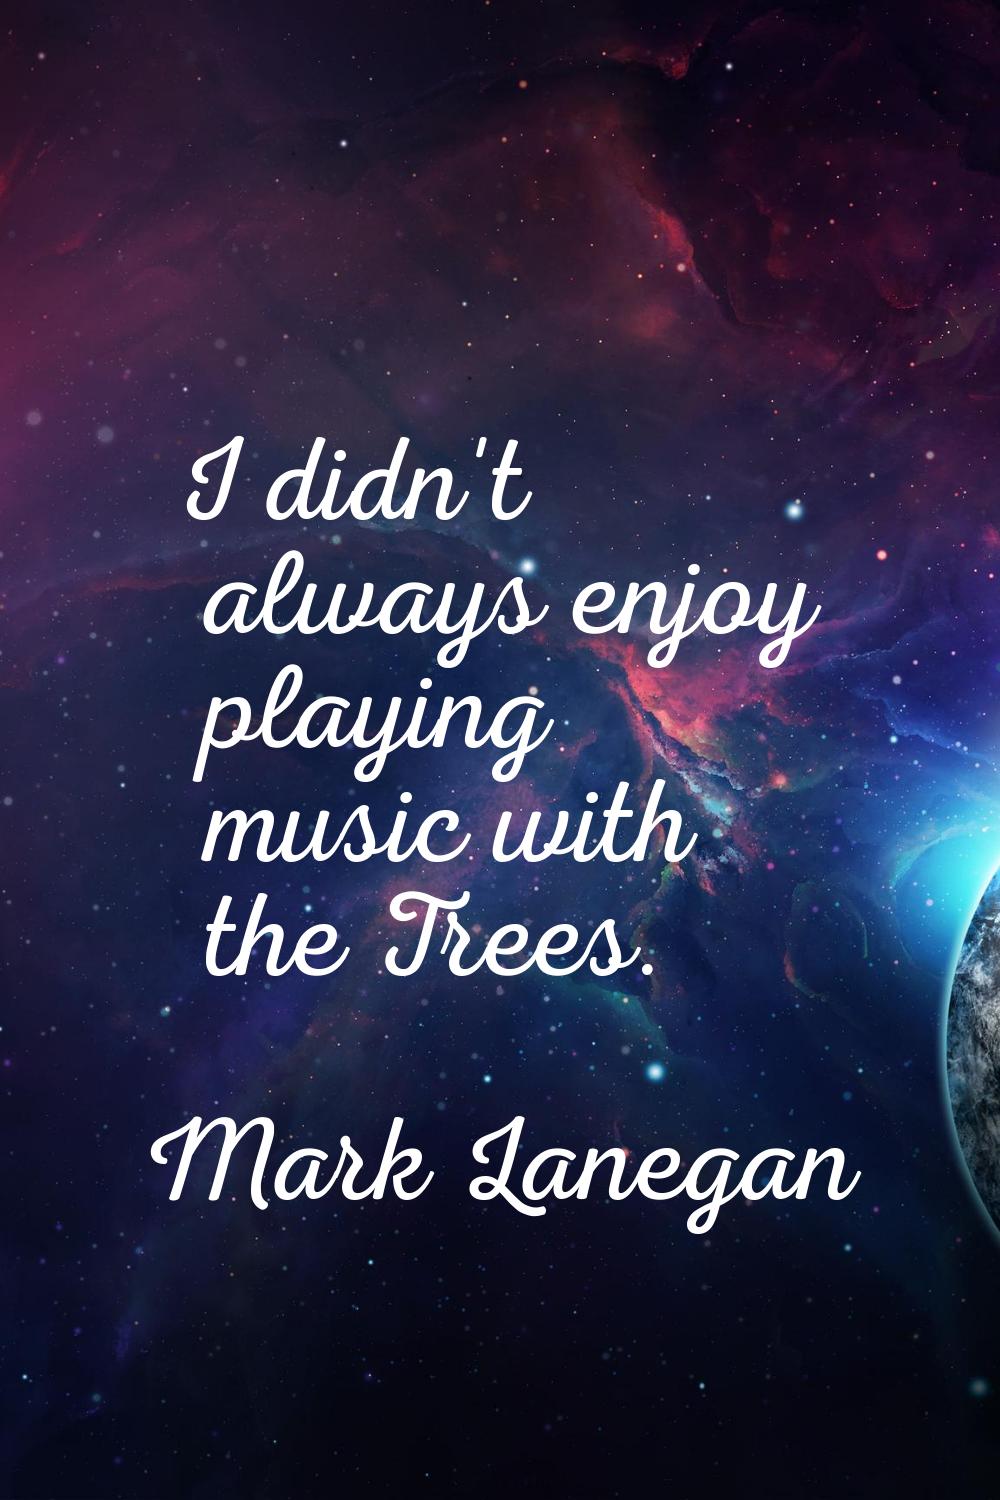 I didn't always enjoy playing music with the Trees.